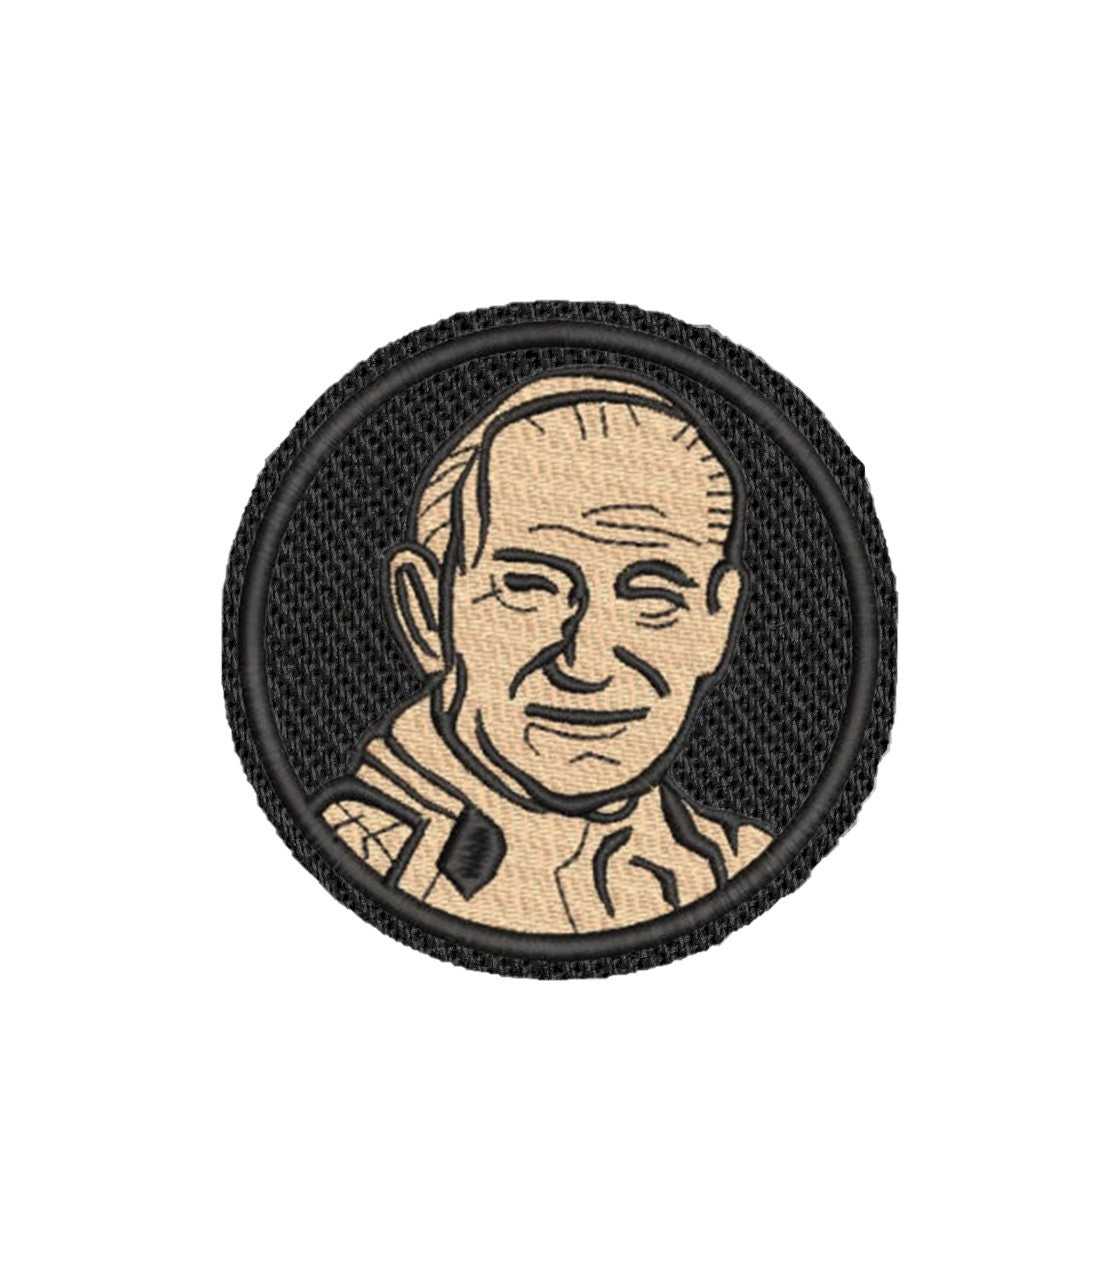 Pope John Paul the Second Iron on Patch / Sew on embroidered patches - Religion & Faith Embroidery Women Applique Merit for Clothing Jacket